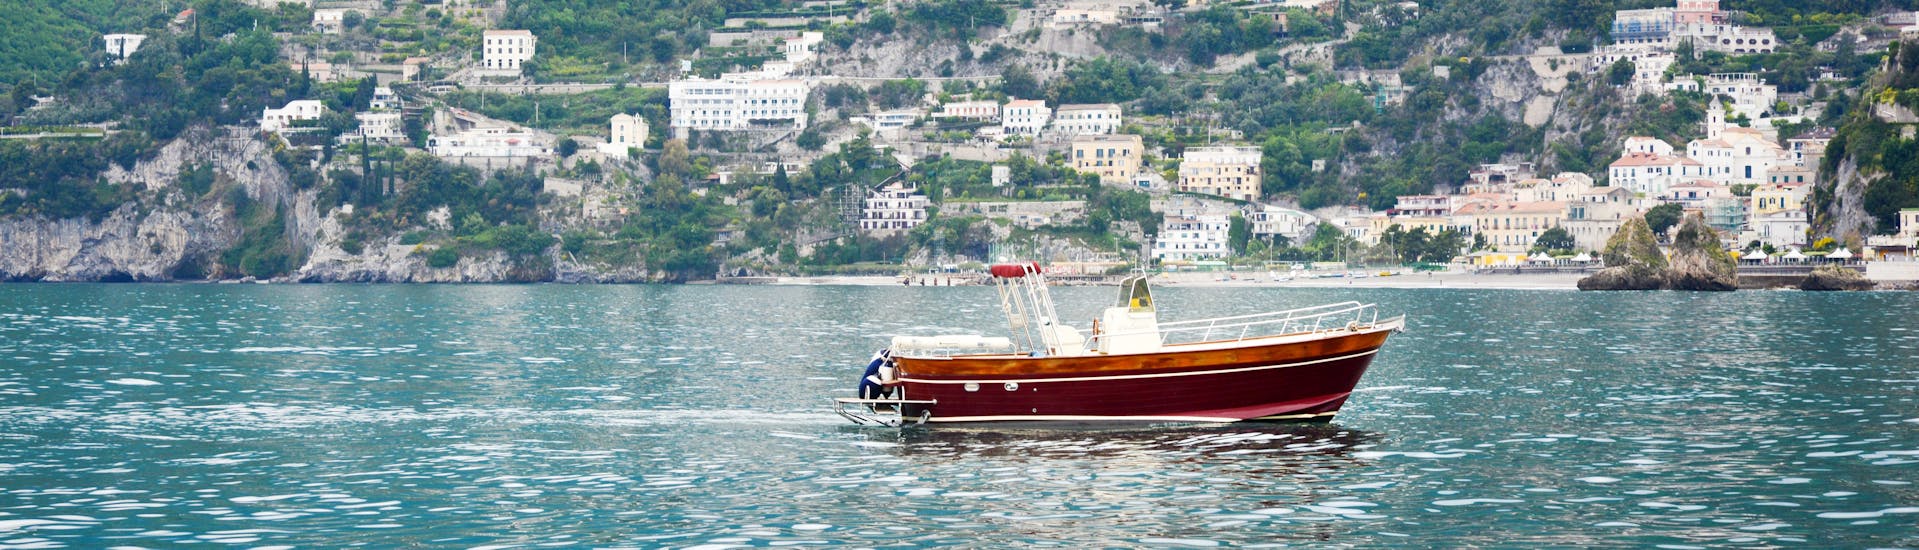 The boat from Blu Mediterraneo Amalfi Coast during the Boat Trip from Salerno to the Island of Capri.